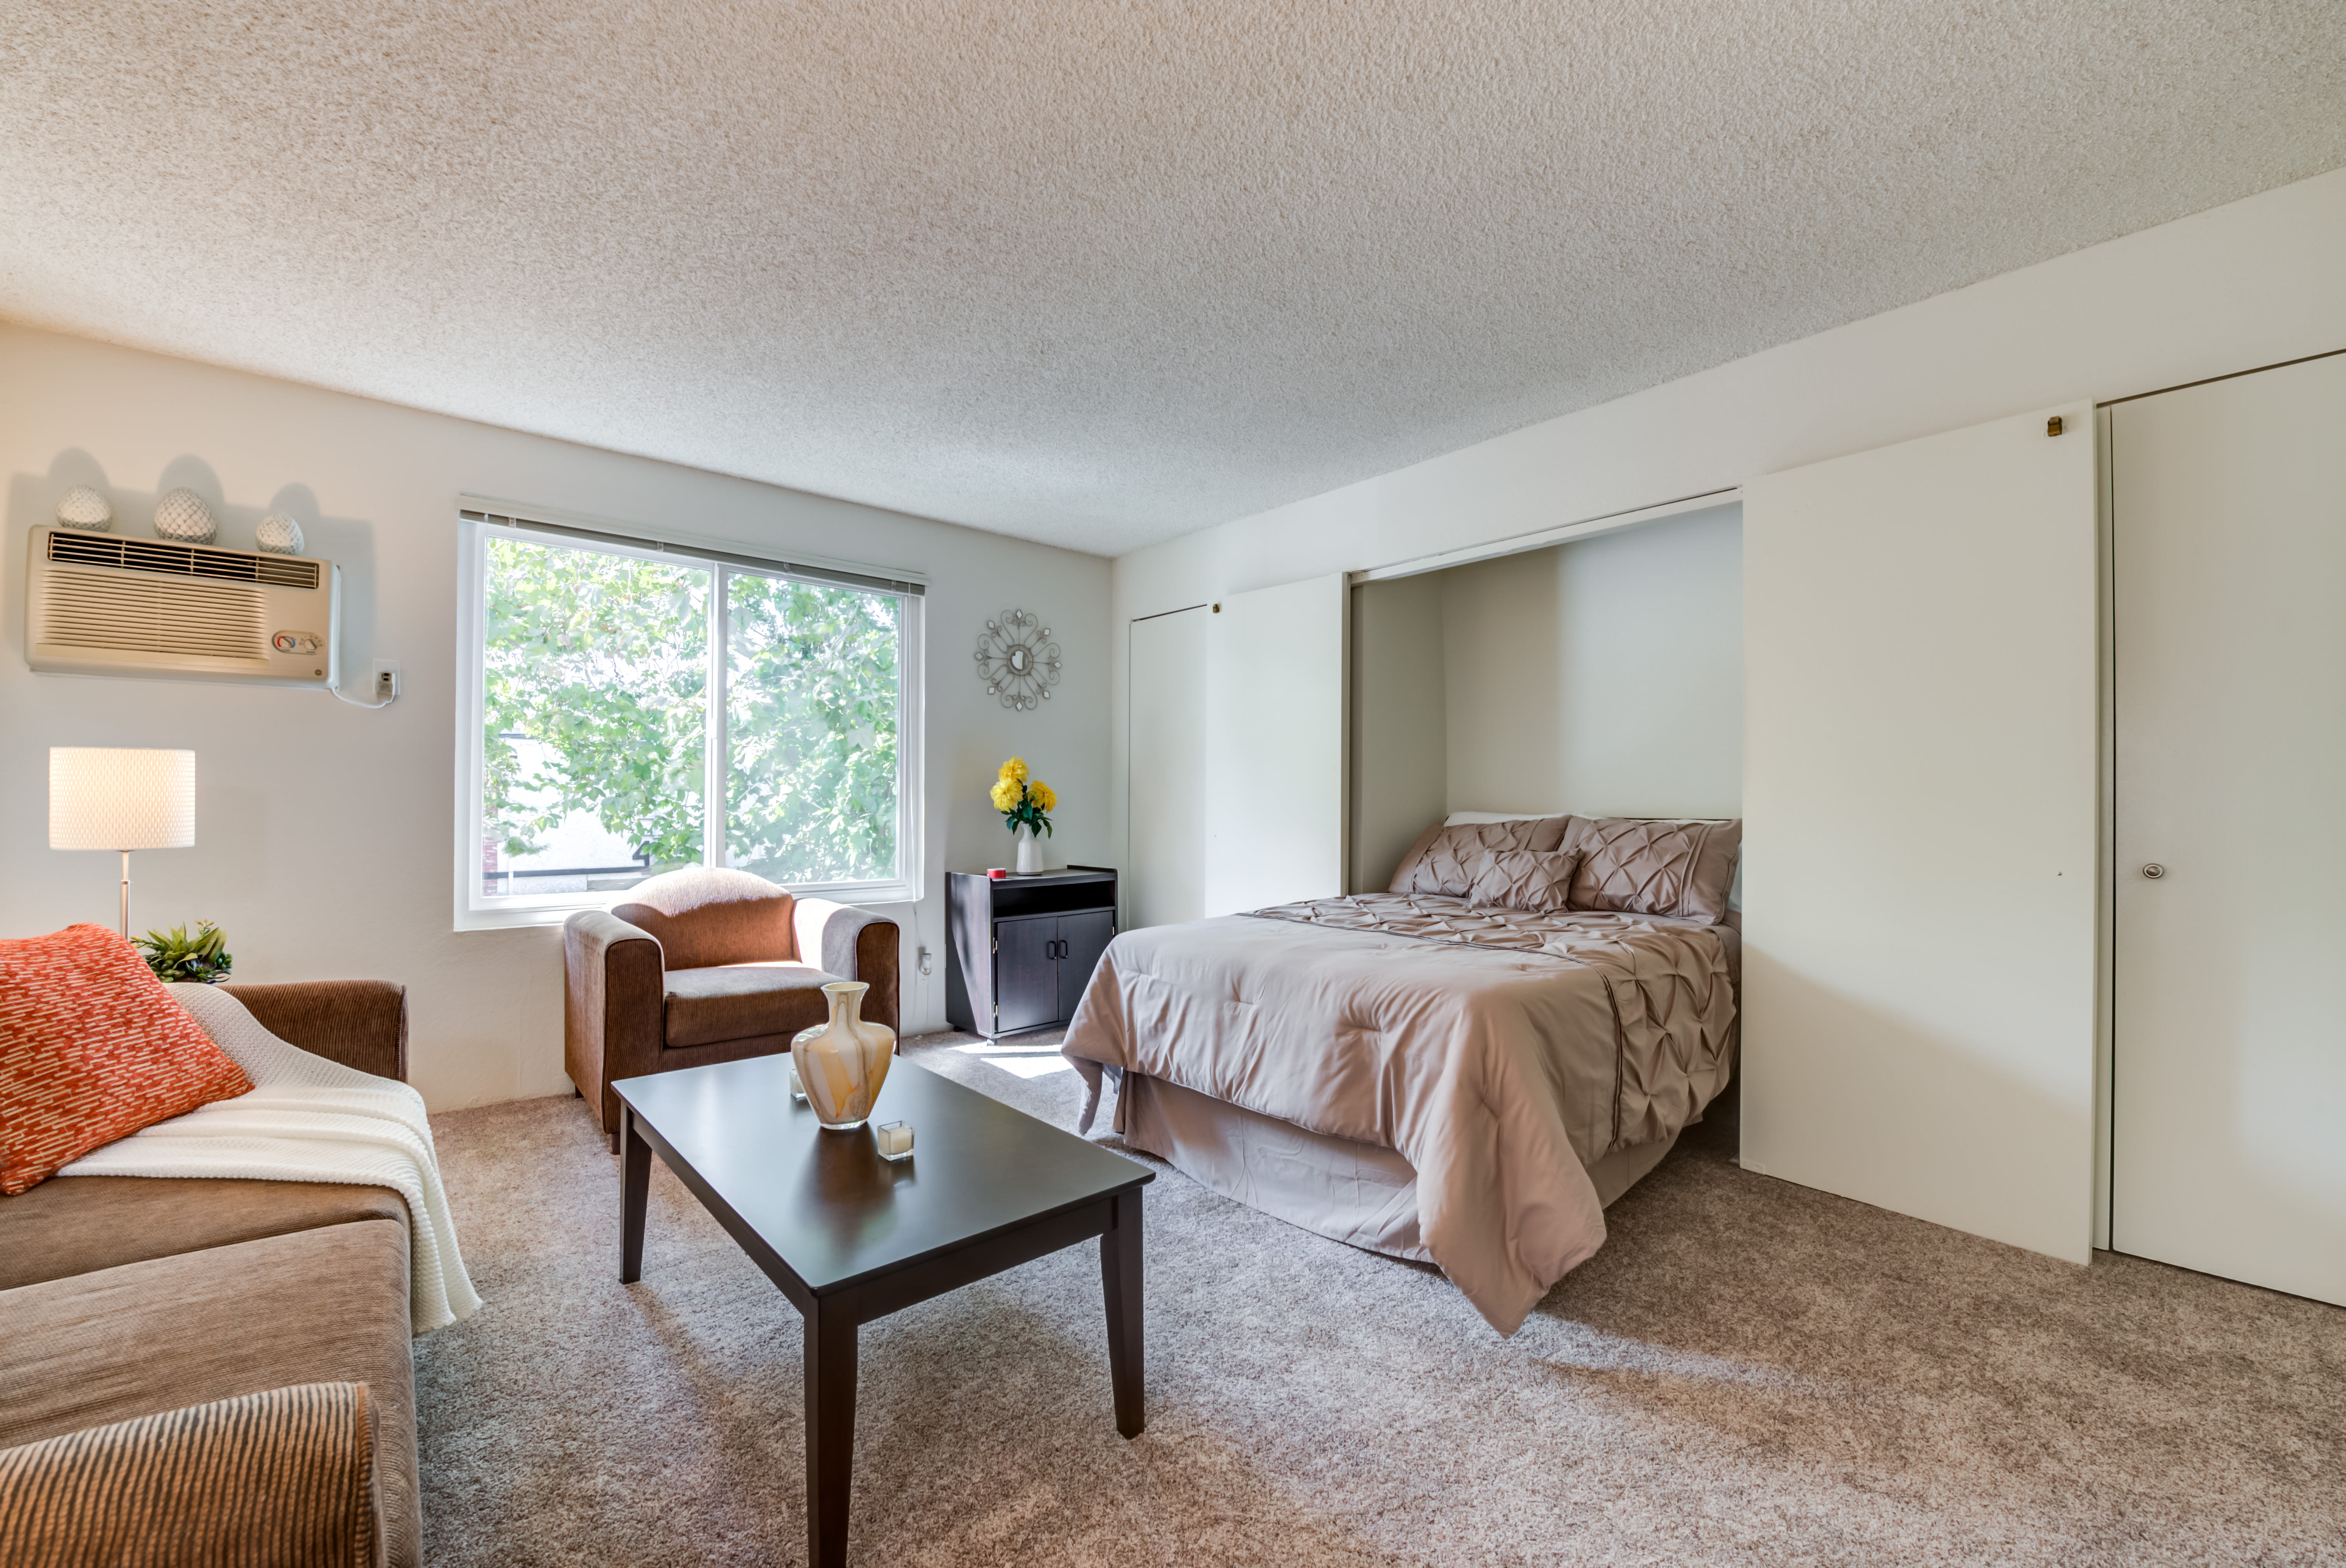 Furnished Studio apartment with ample natural light and murphy bed folded down The Newporter in Tarzana, California